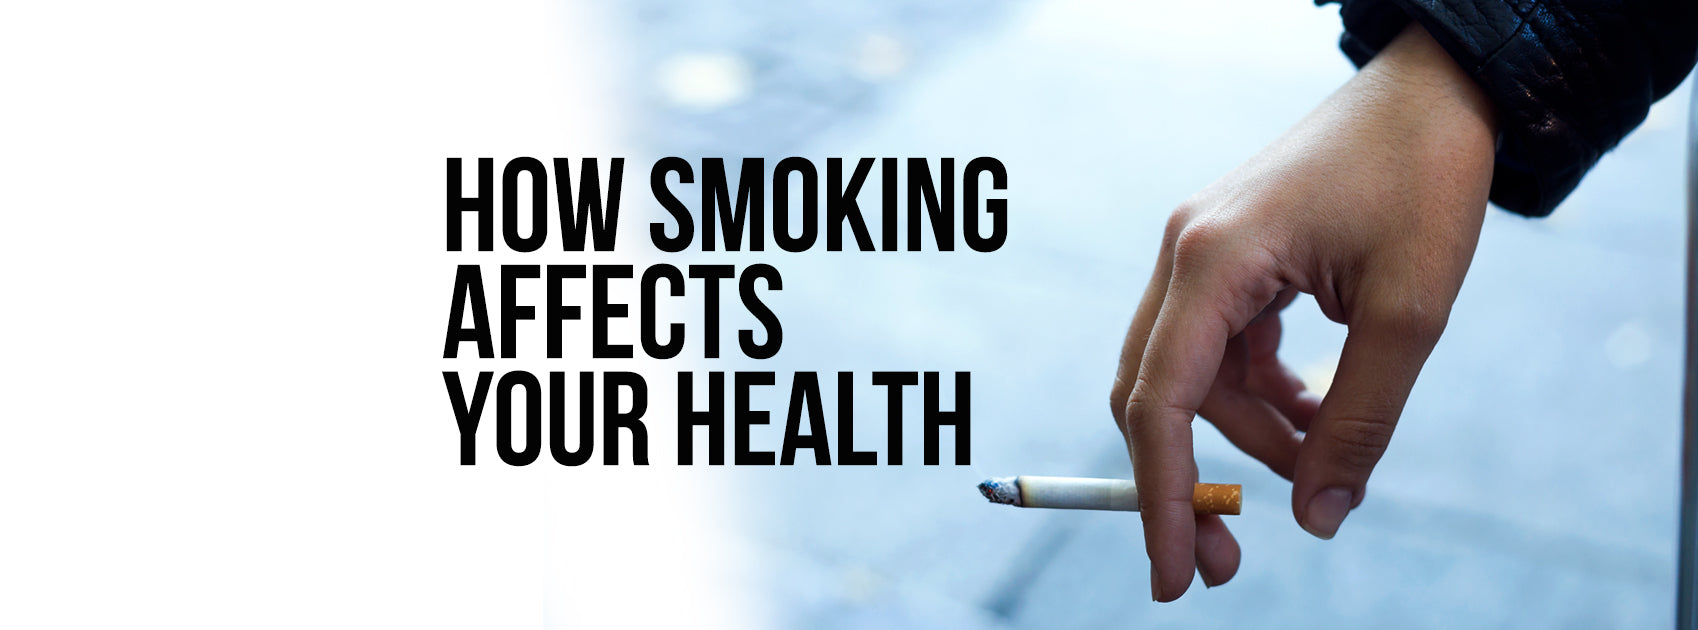 HOW SMOKING AFFECTS YOUR HEALTH AND WHAT TO DO ABOUT IT